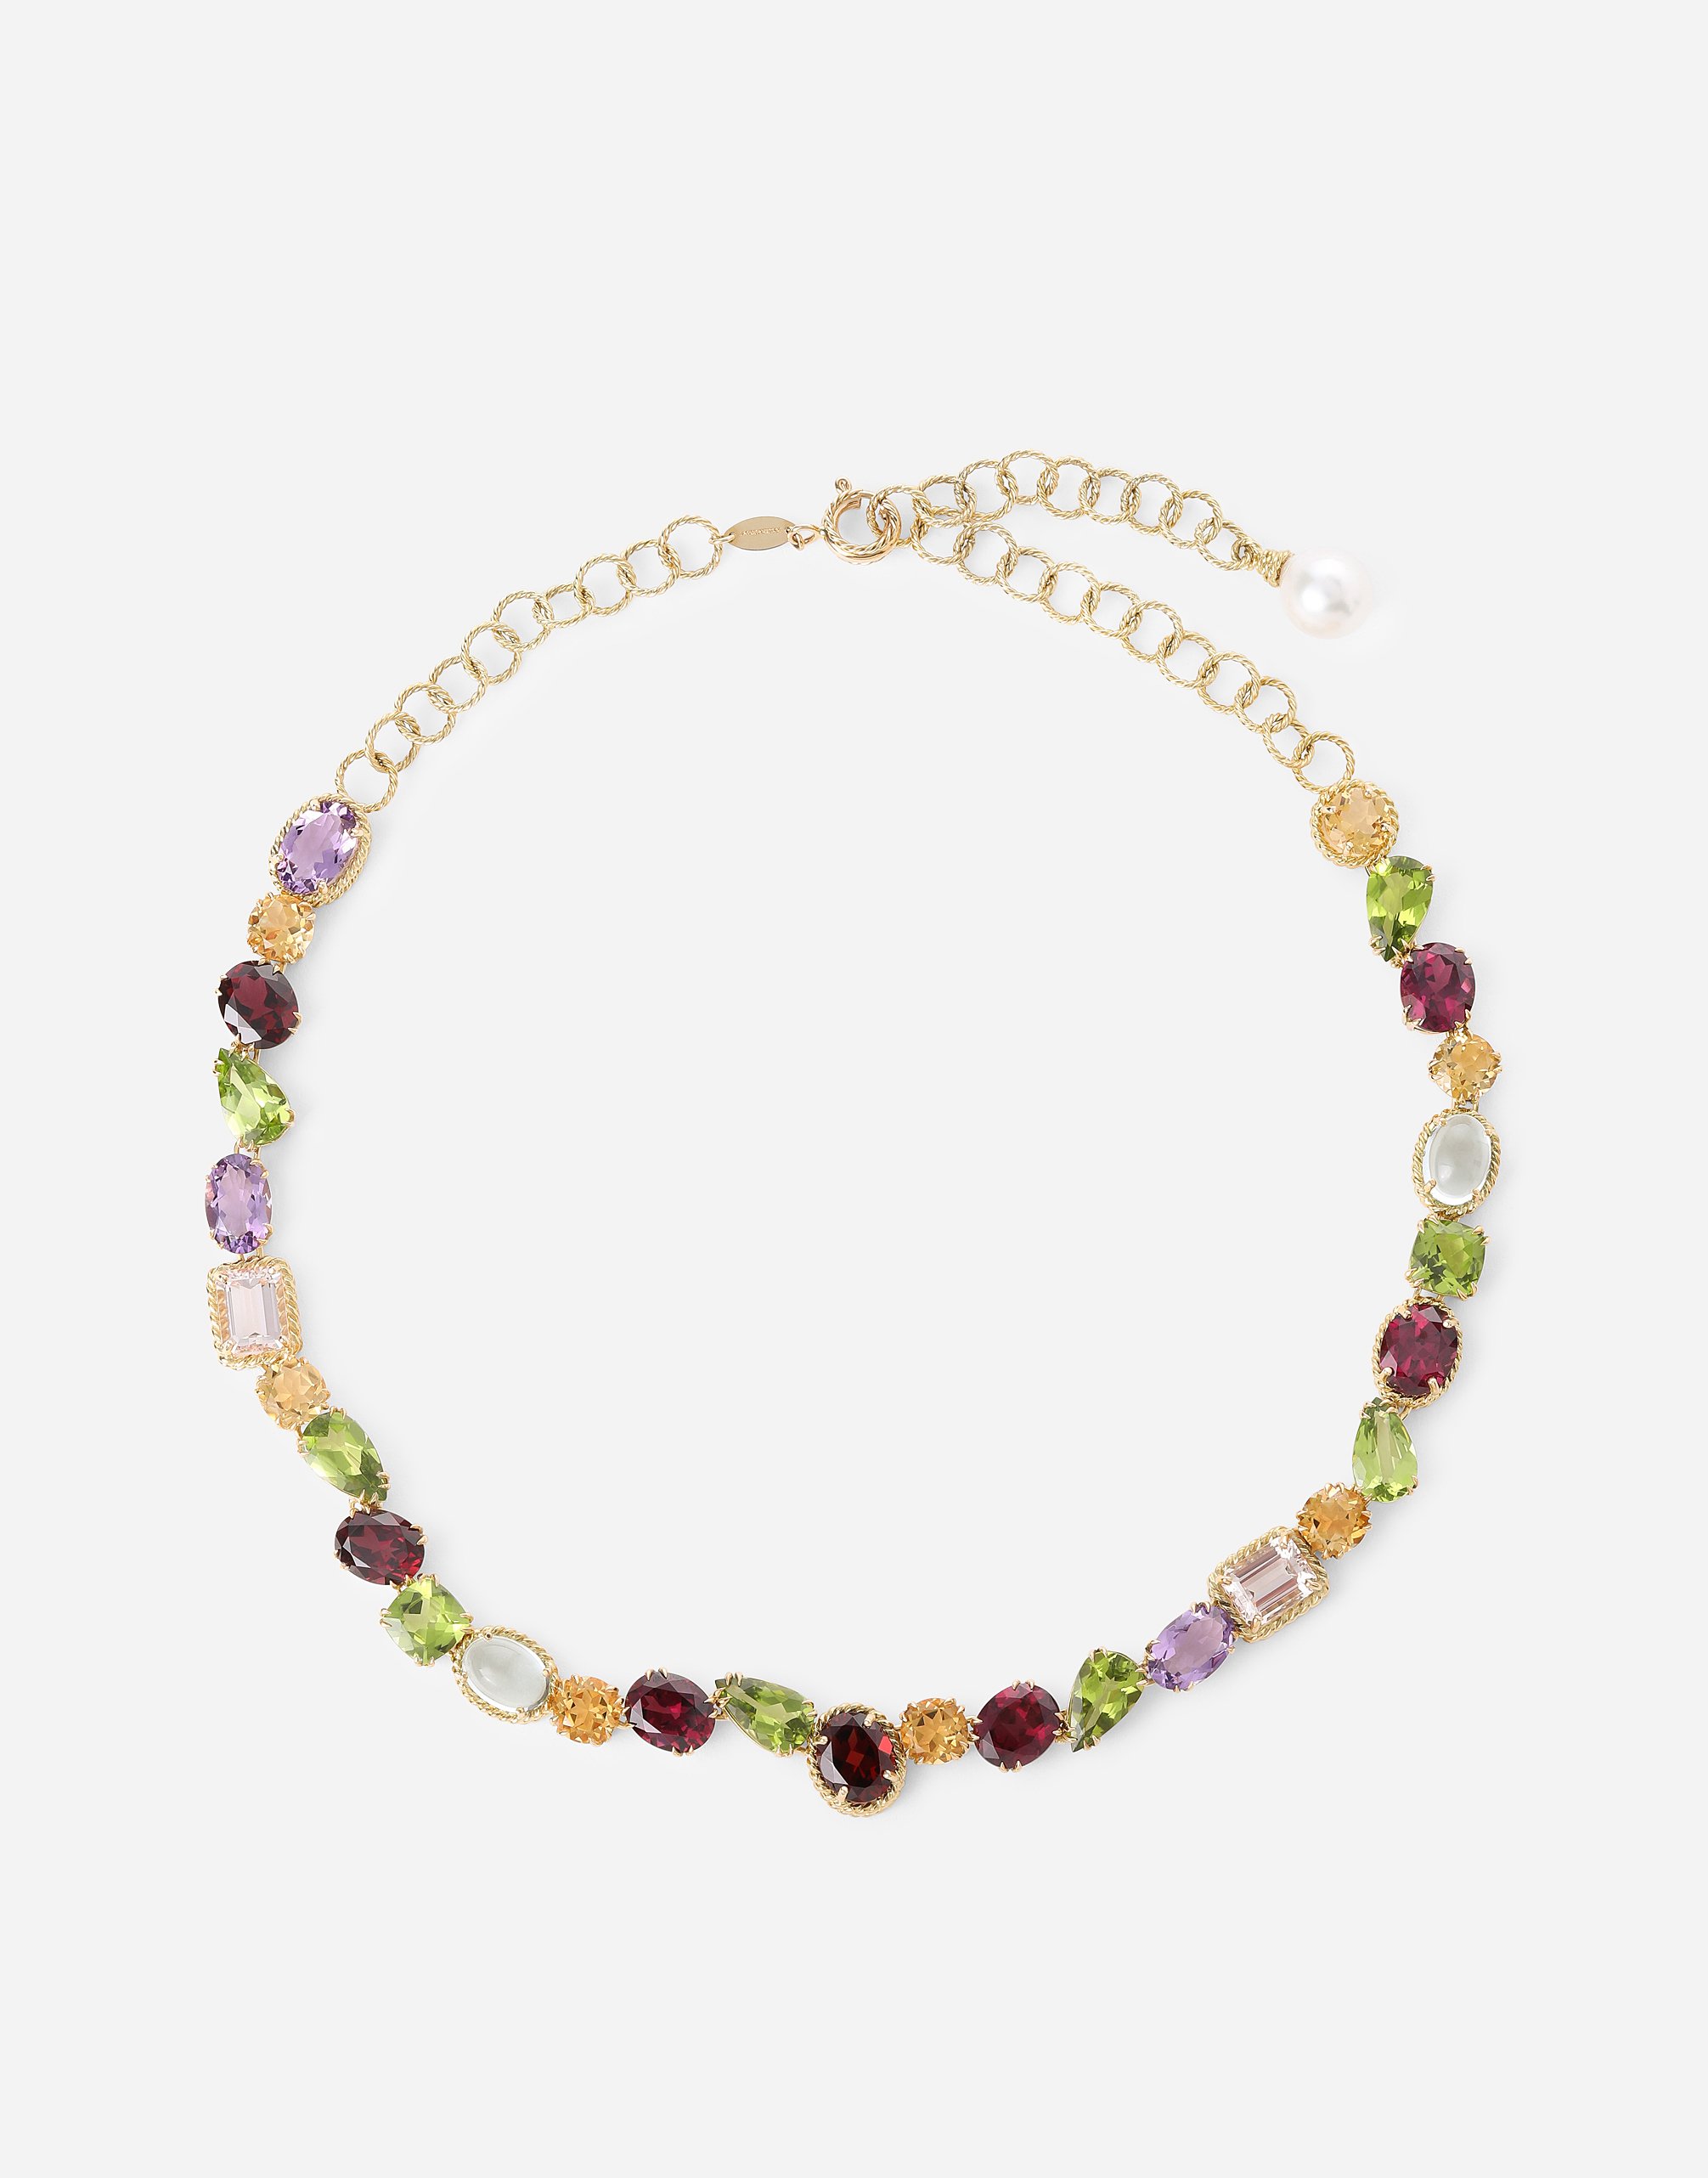 Anna necklace in yellow 18kt gold with different multicoulour gemstones in Gold